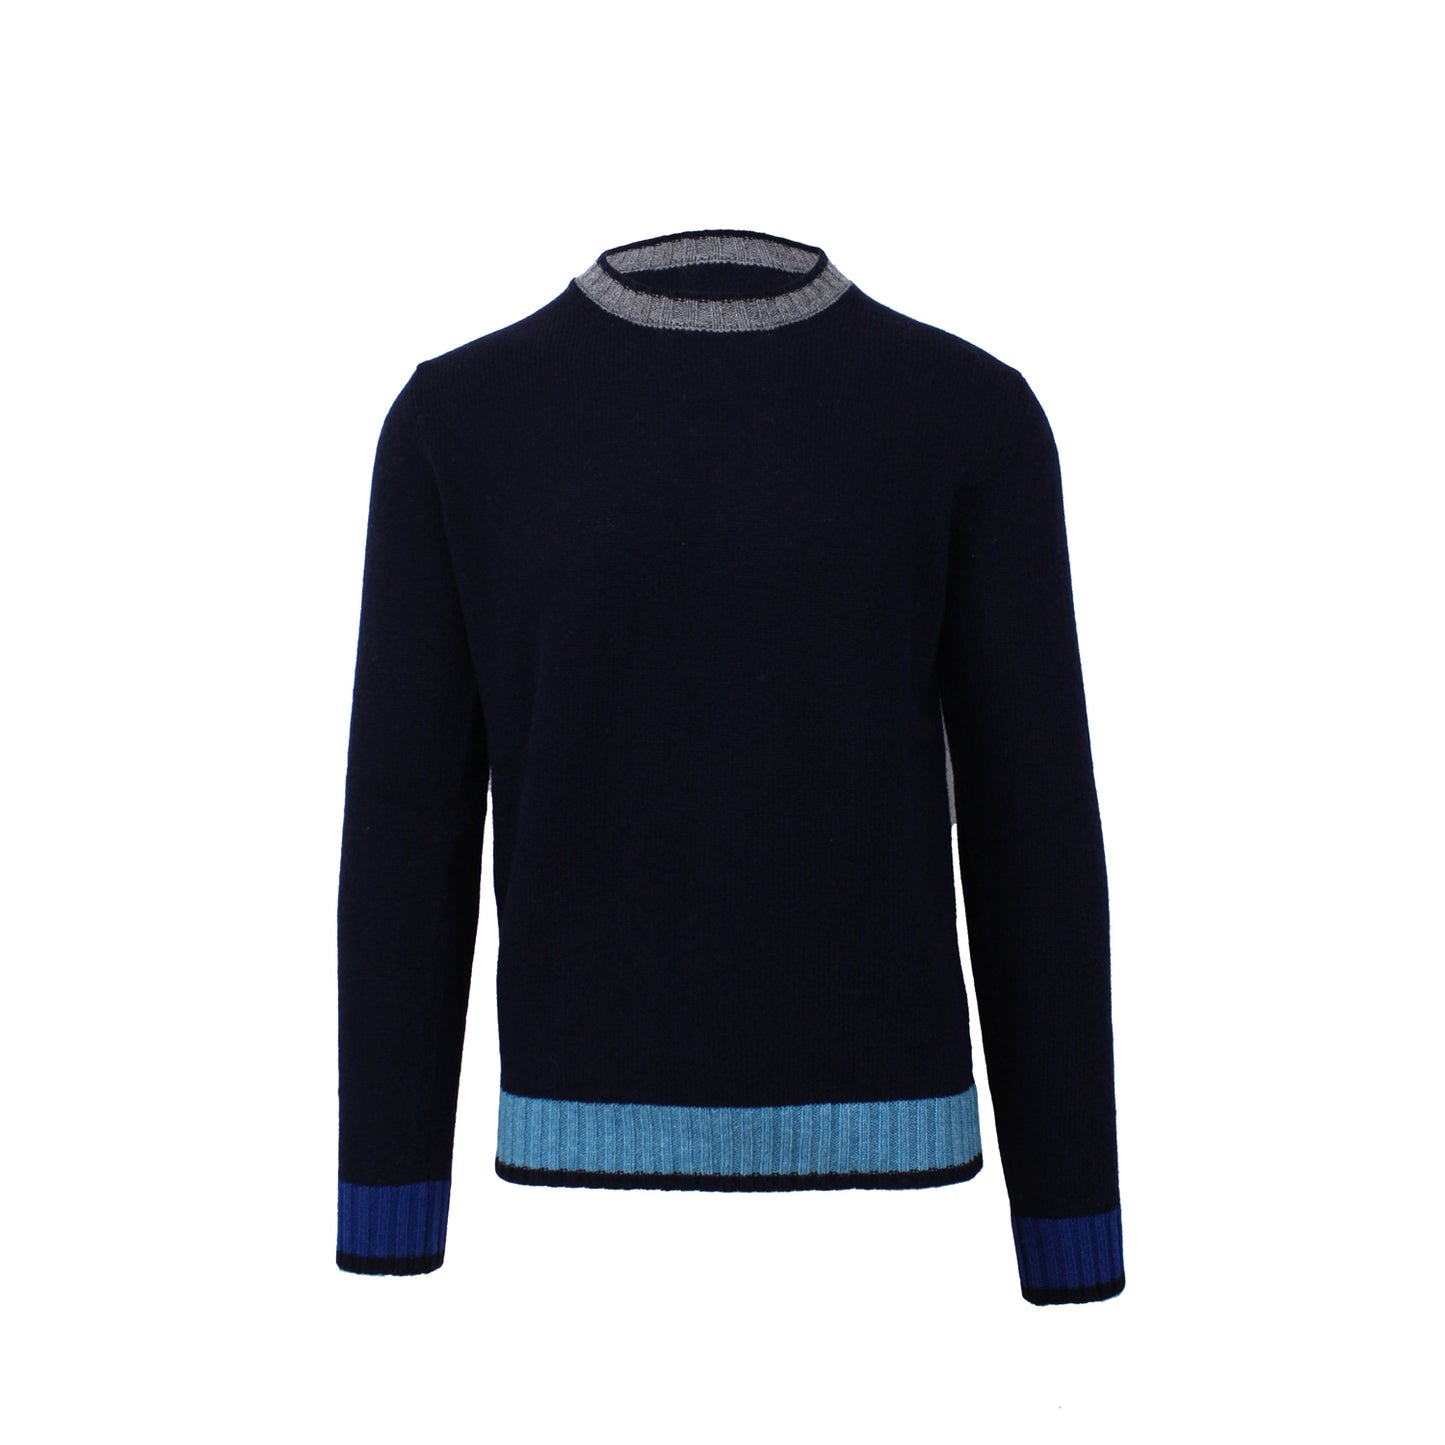 Navy Crewneck Sweater with Contrast Accents